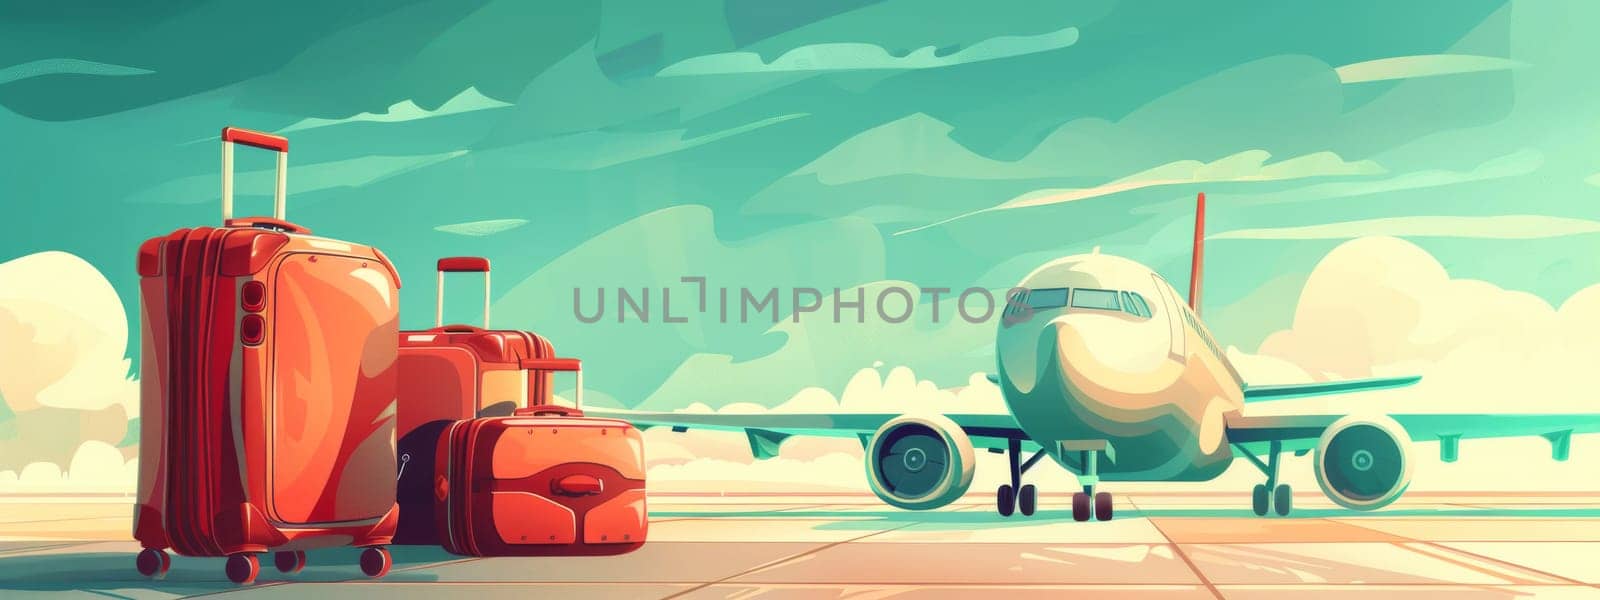 Luggage and airplane, traveling concept by Kadula